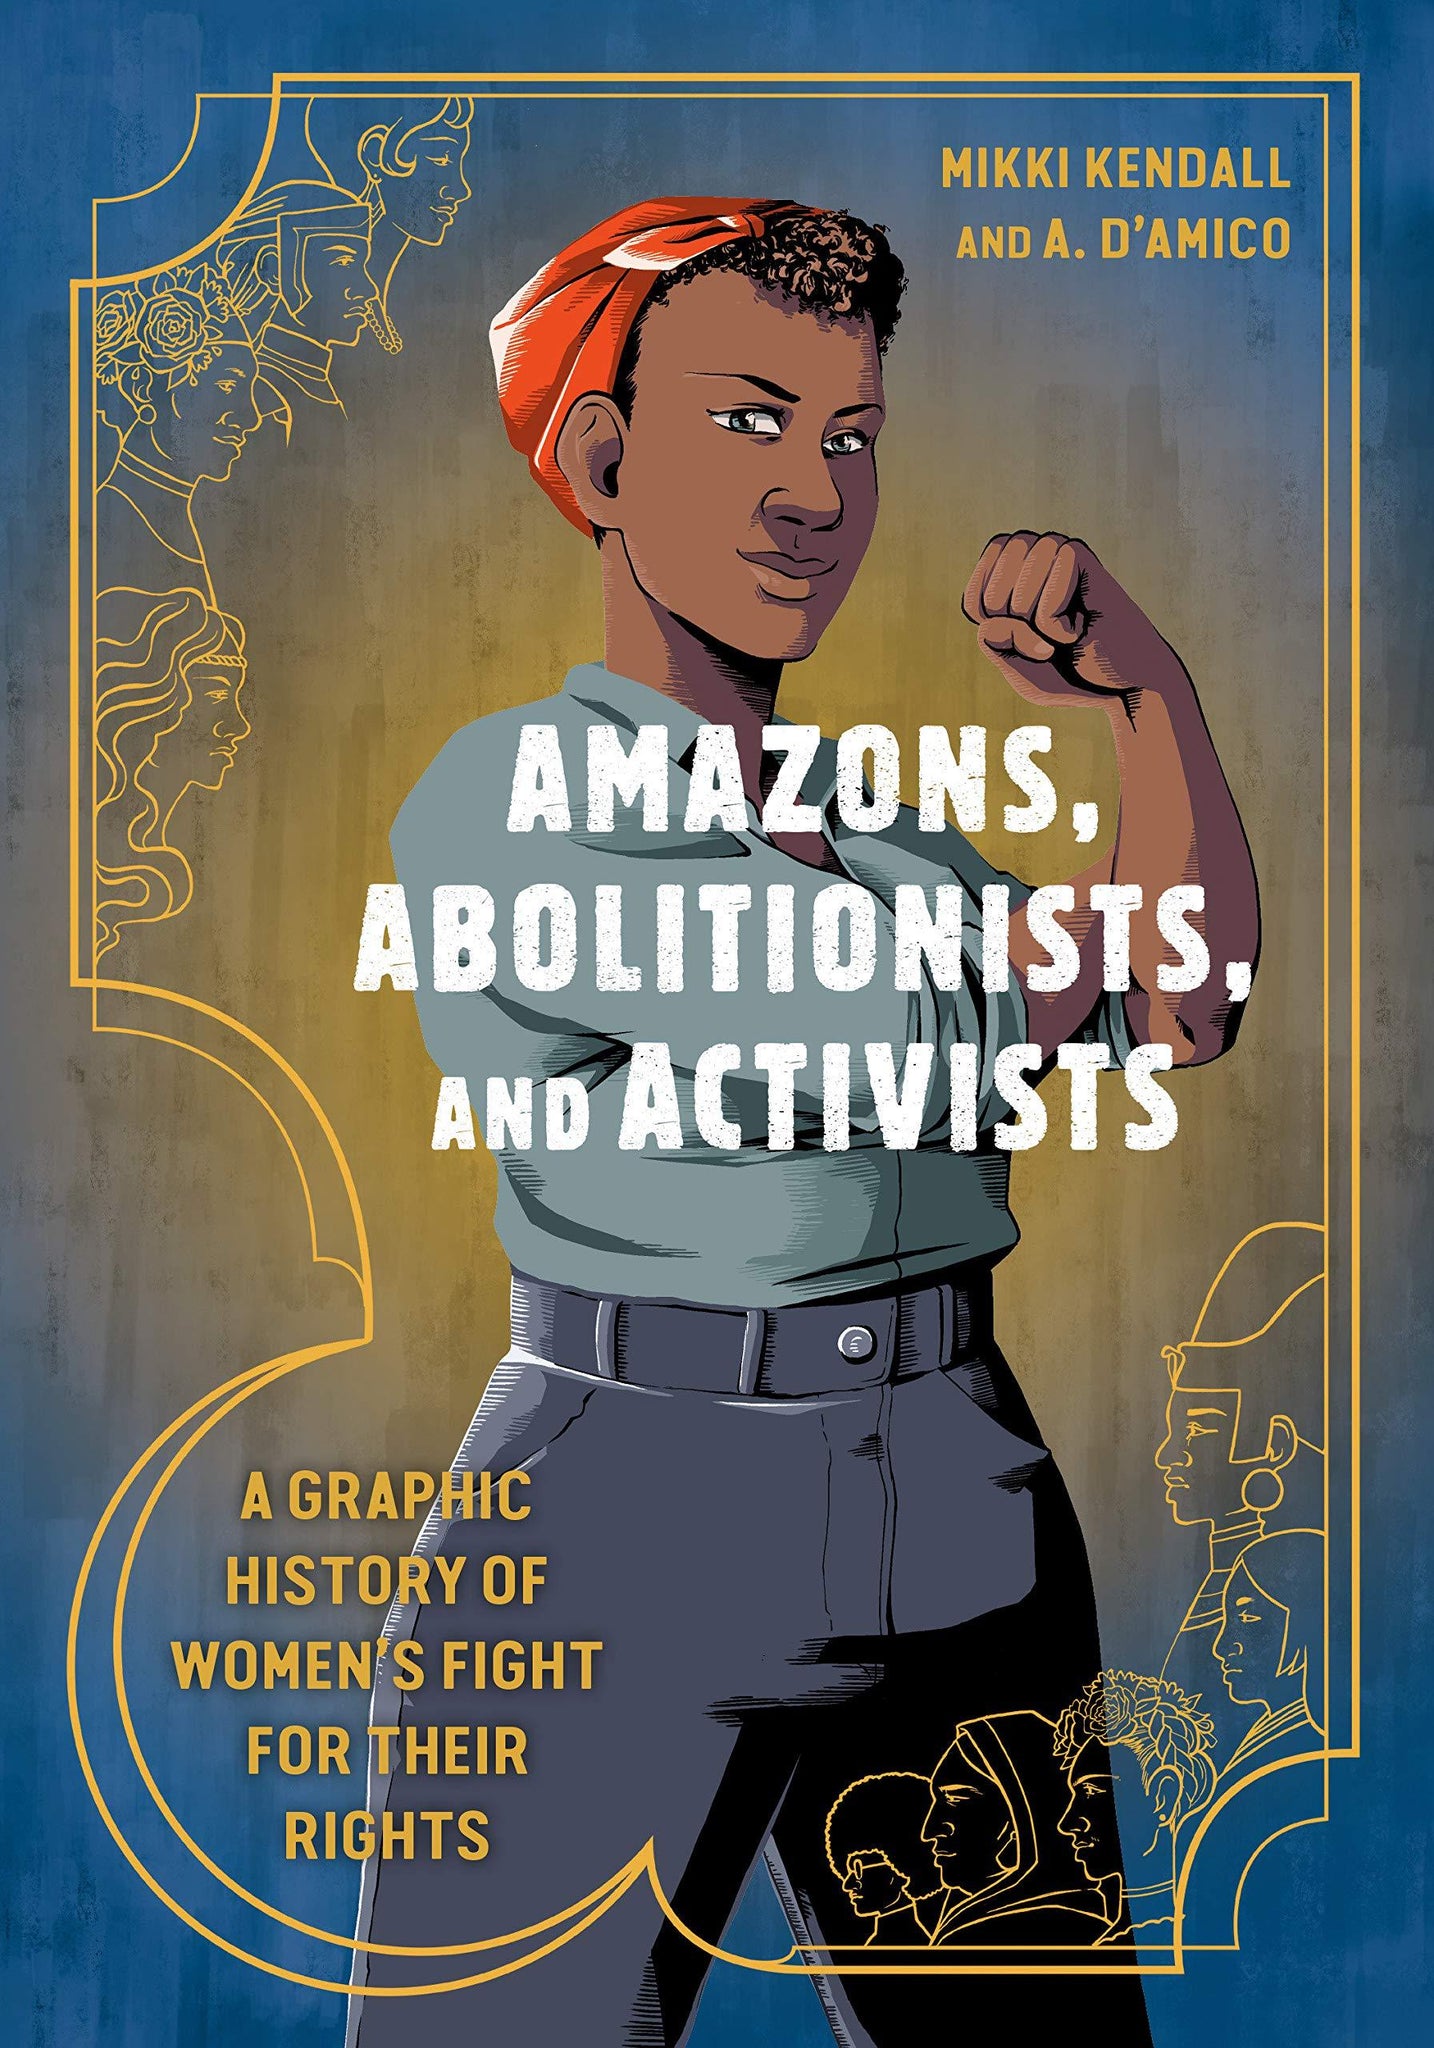 Amazons, Abolitionists, and Activists: A Graphic History of Women's Fight for Their Rights - ShopQueer.co